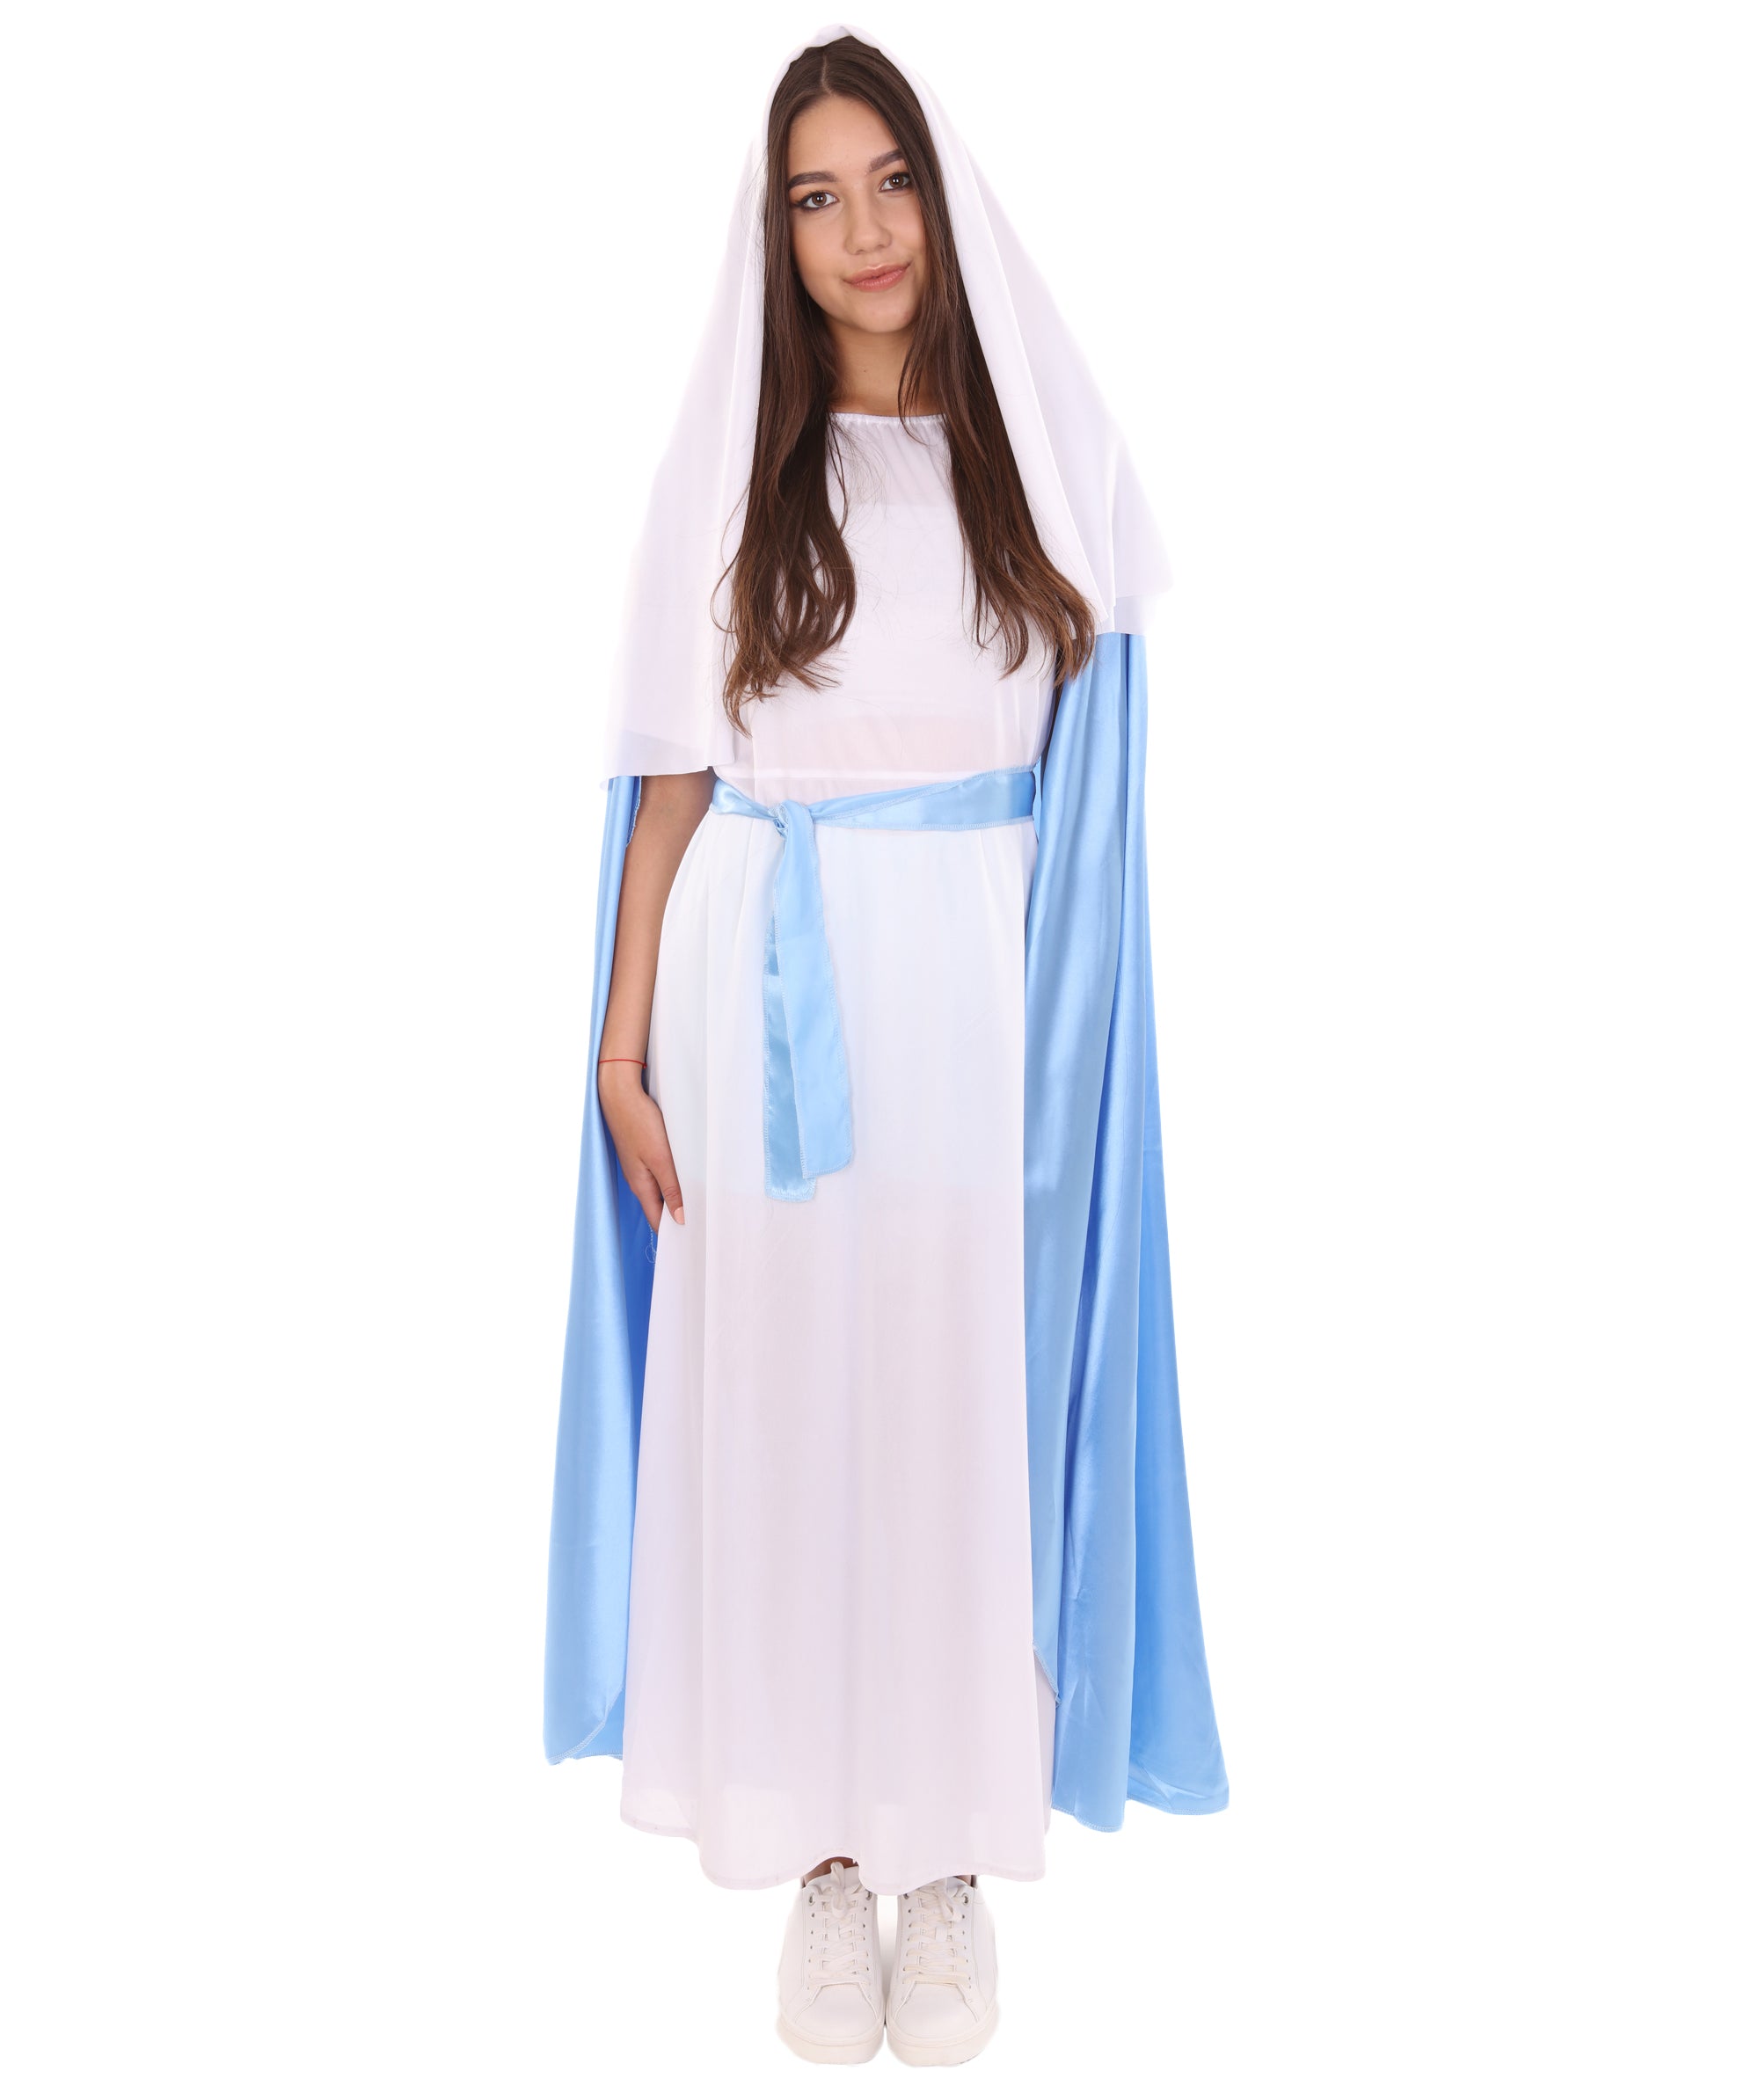 mary nativity outfit